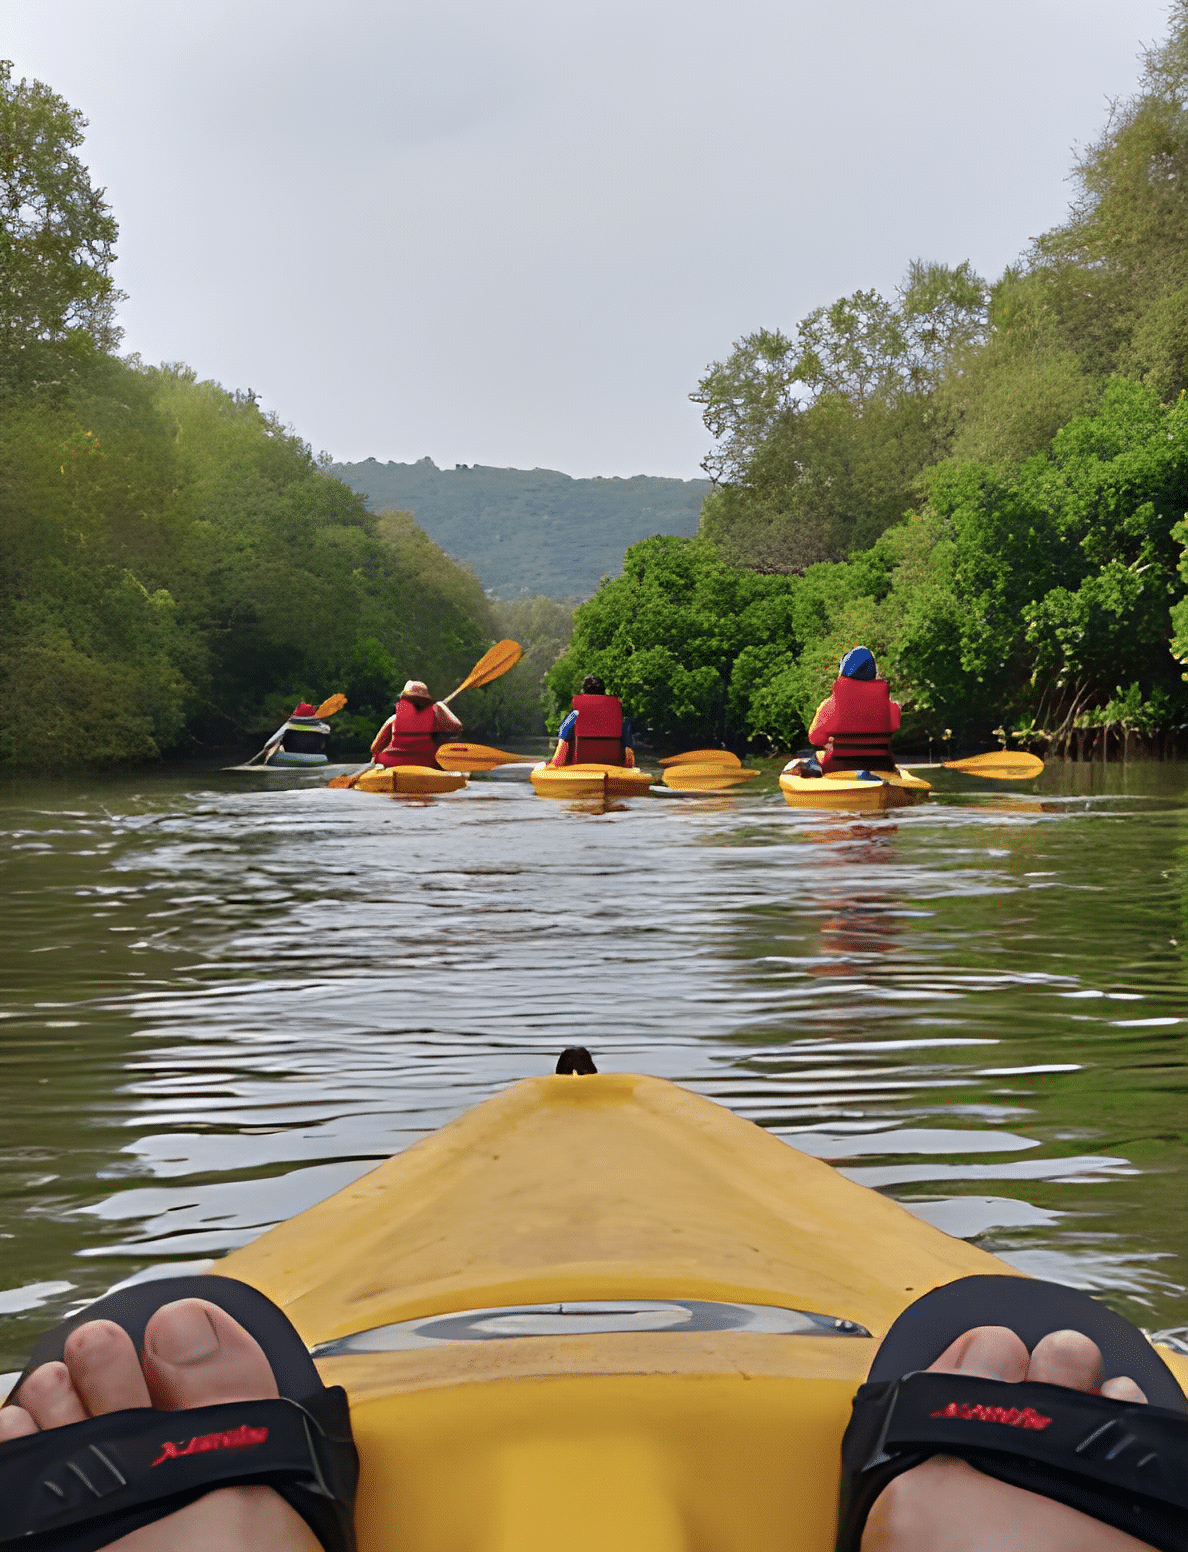 Kayaking at Spike's River in Goa